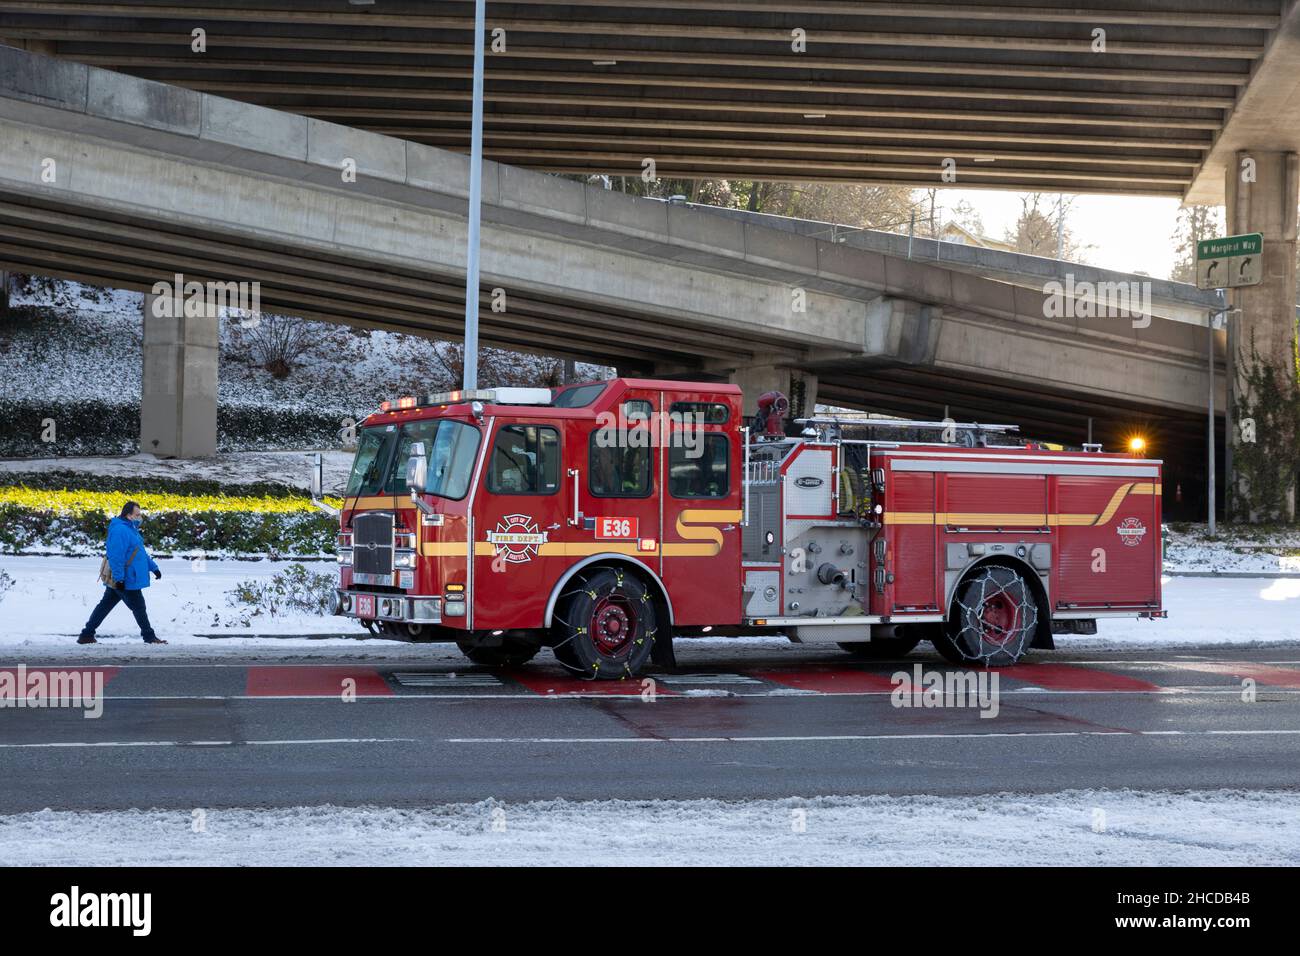 Seattle, Washington, USA. 27th December, 2021. The Seattle Fire Department responds to an emergency under the West Seattle Bridge as dangerously cold temperatures continue on Monday, December 27, 2021. Credit: Paul Christian Gordon/Alamy Live News Stock Photo